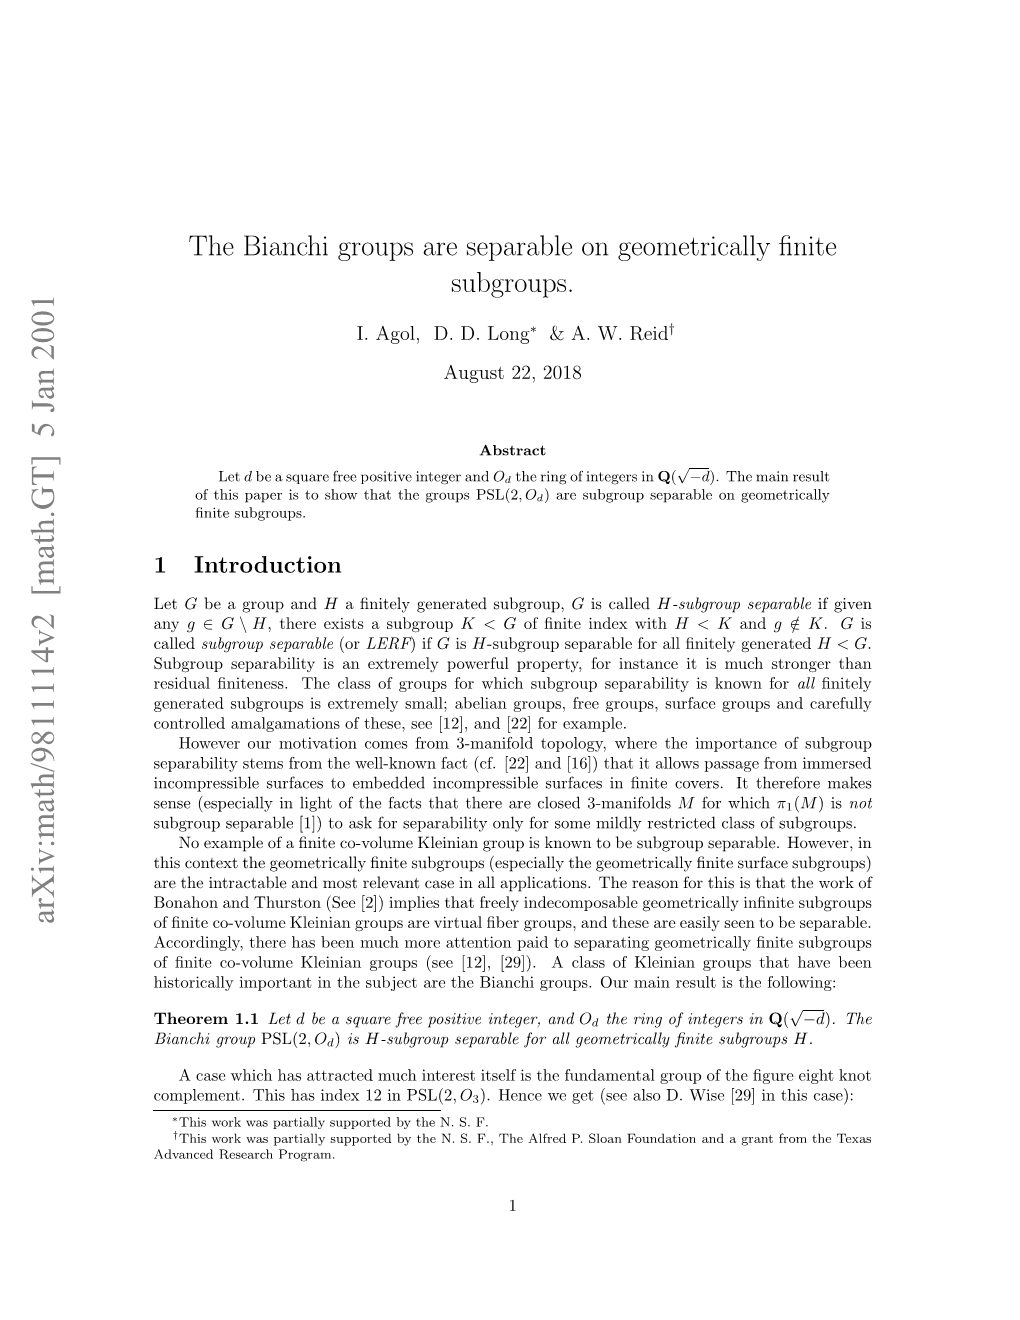 The Bianchi Groups Are Separable on Geometrically Finite Subgroups